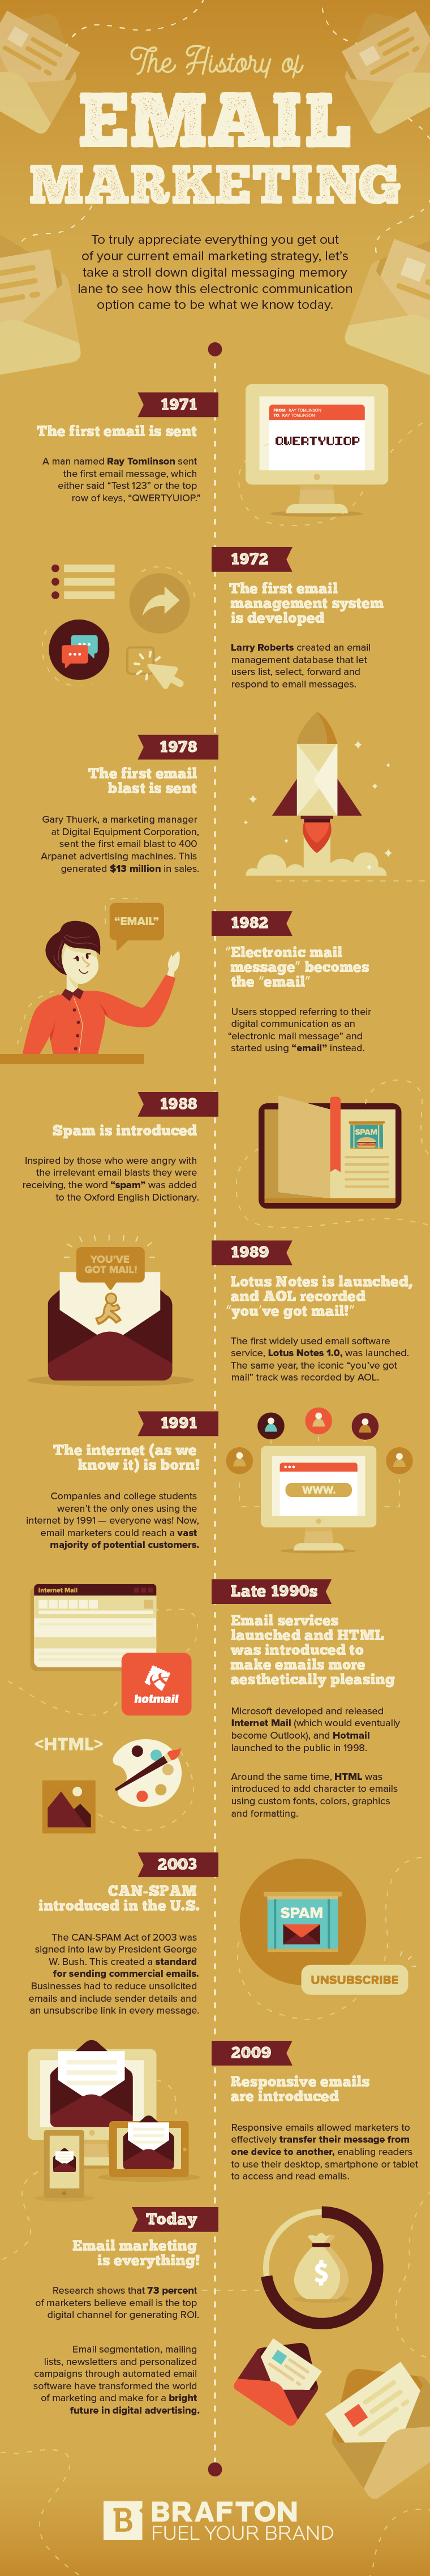 History of email marketing